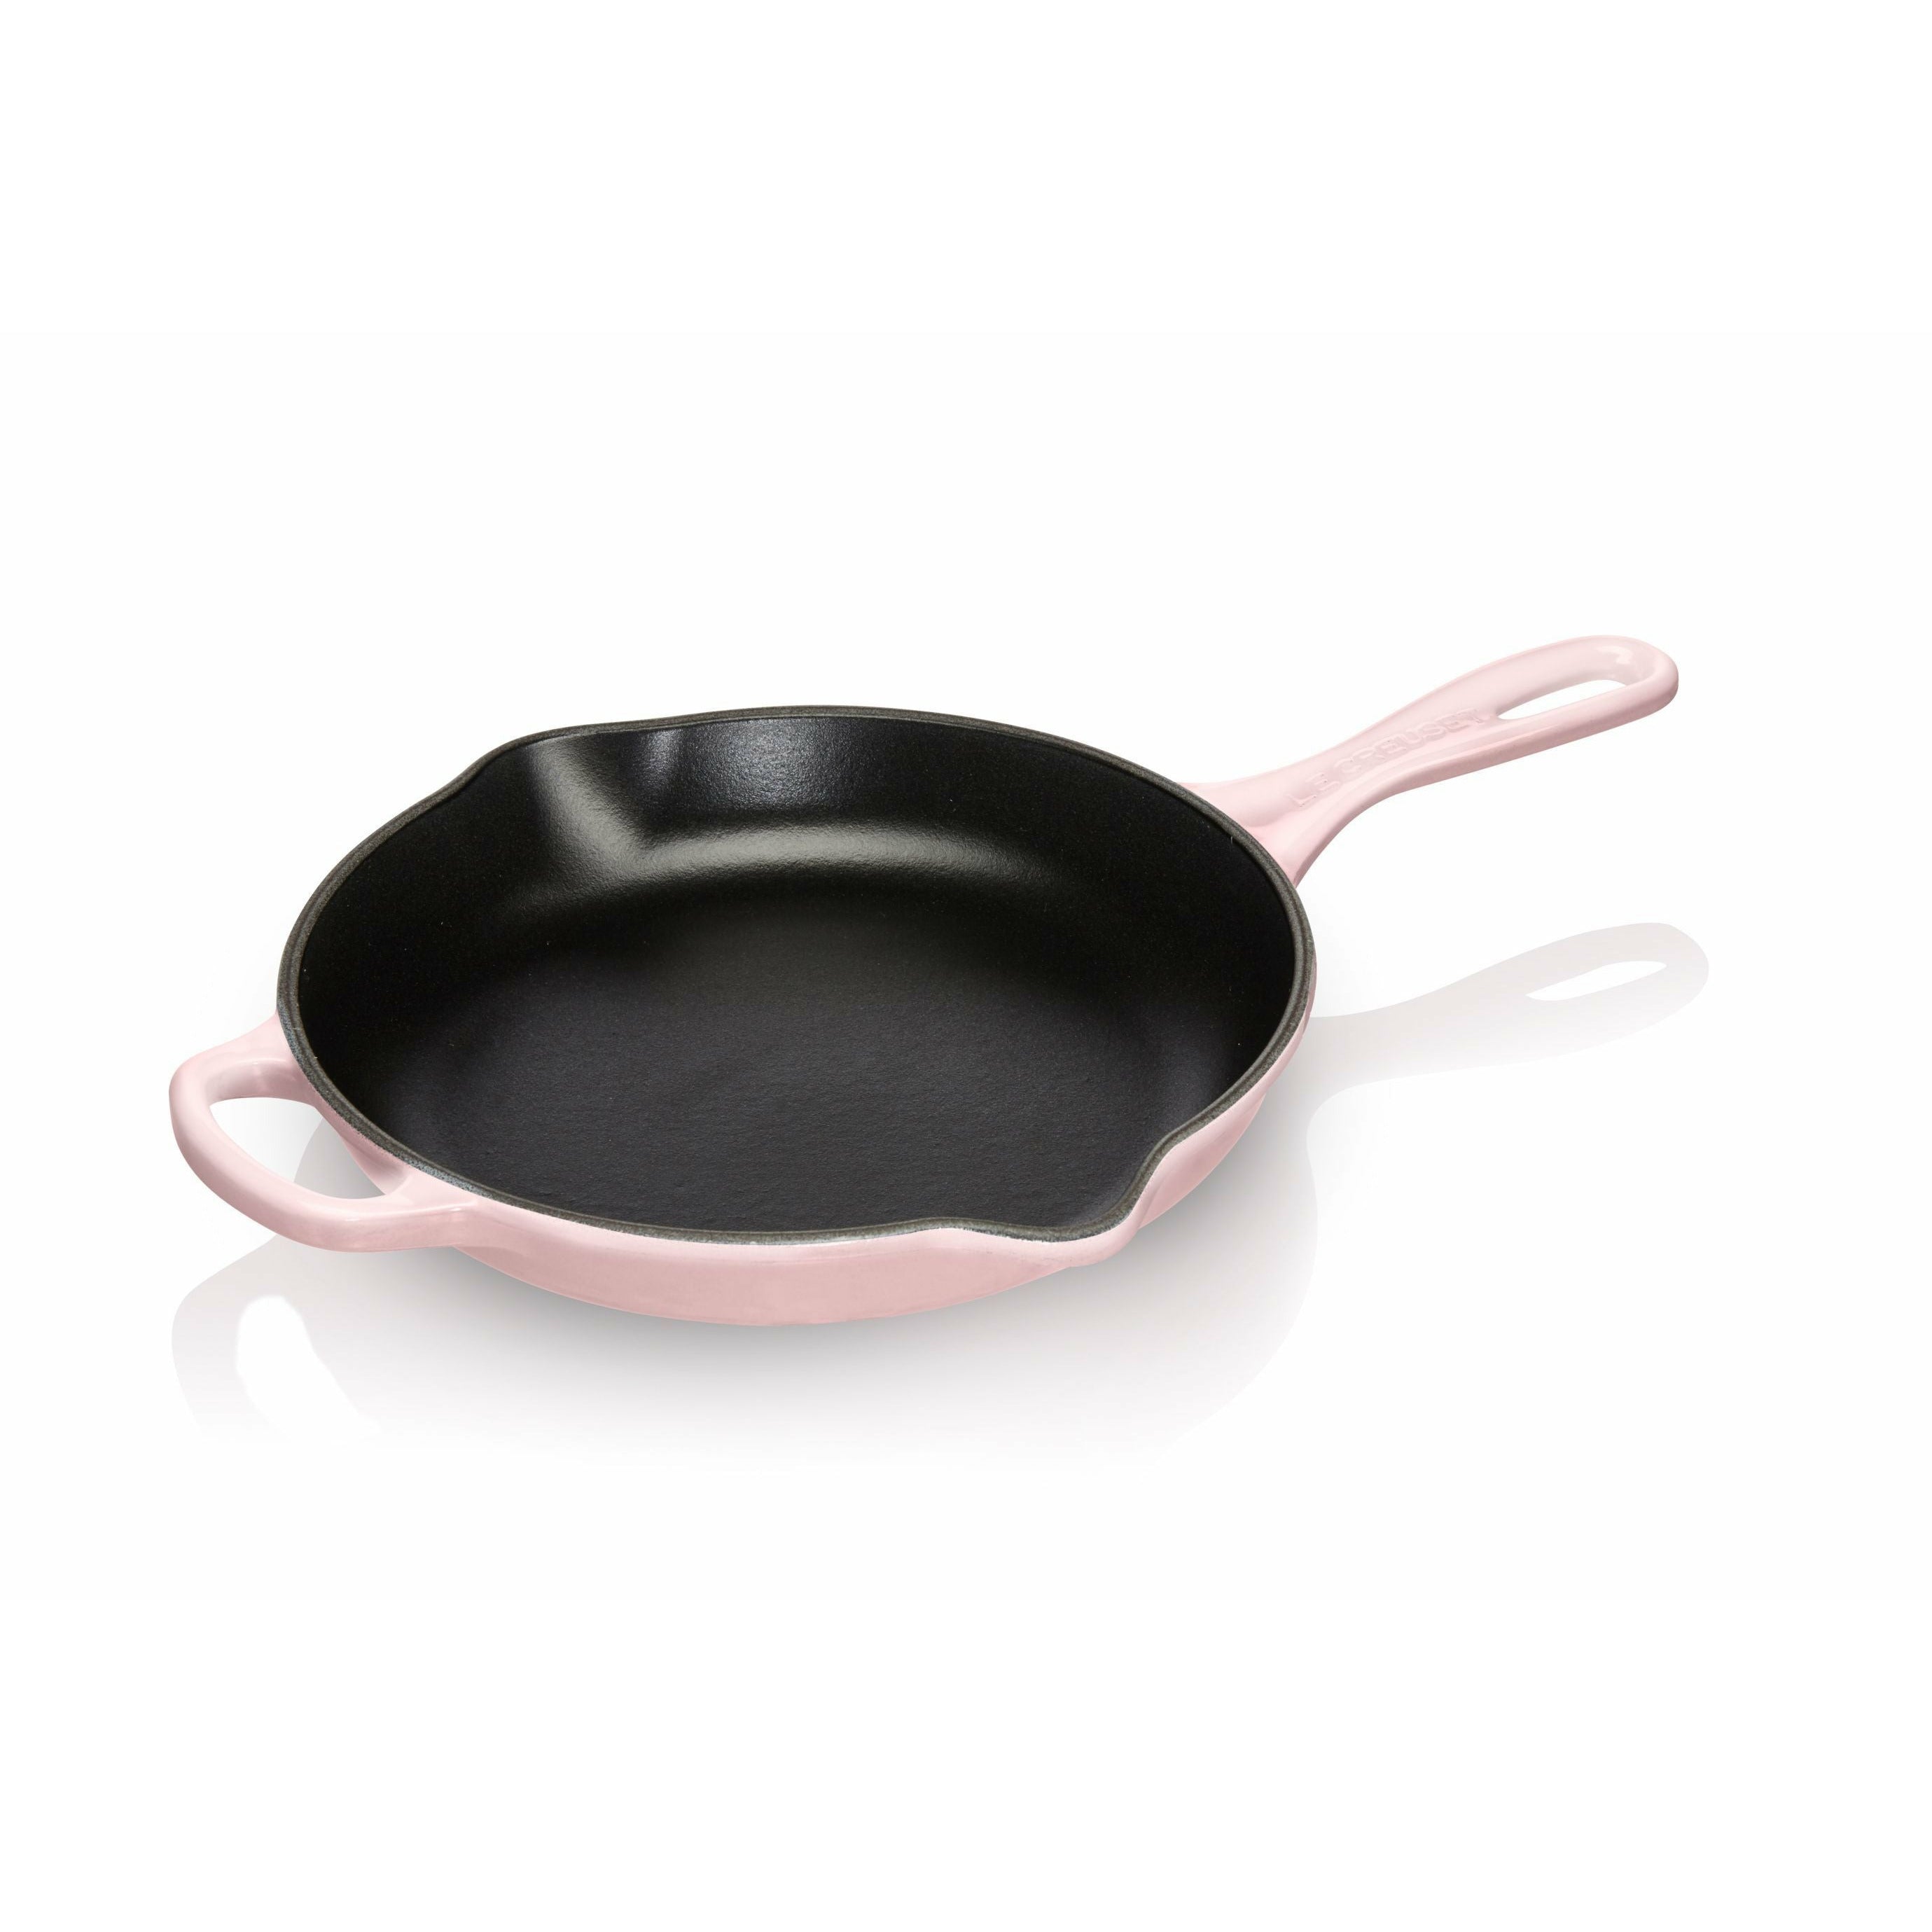 Le Creuset Signature Round Frying and Servant Pan 23 cm, coquille rose